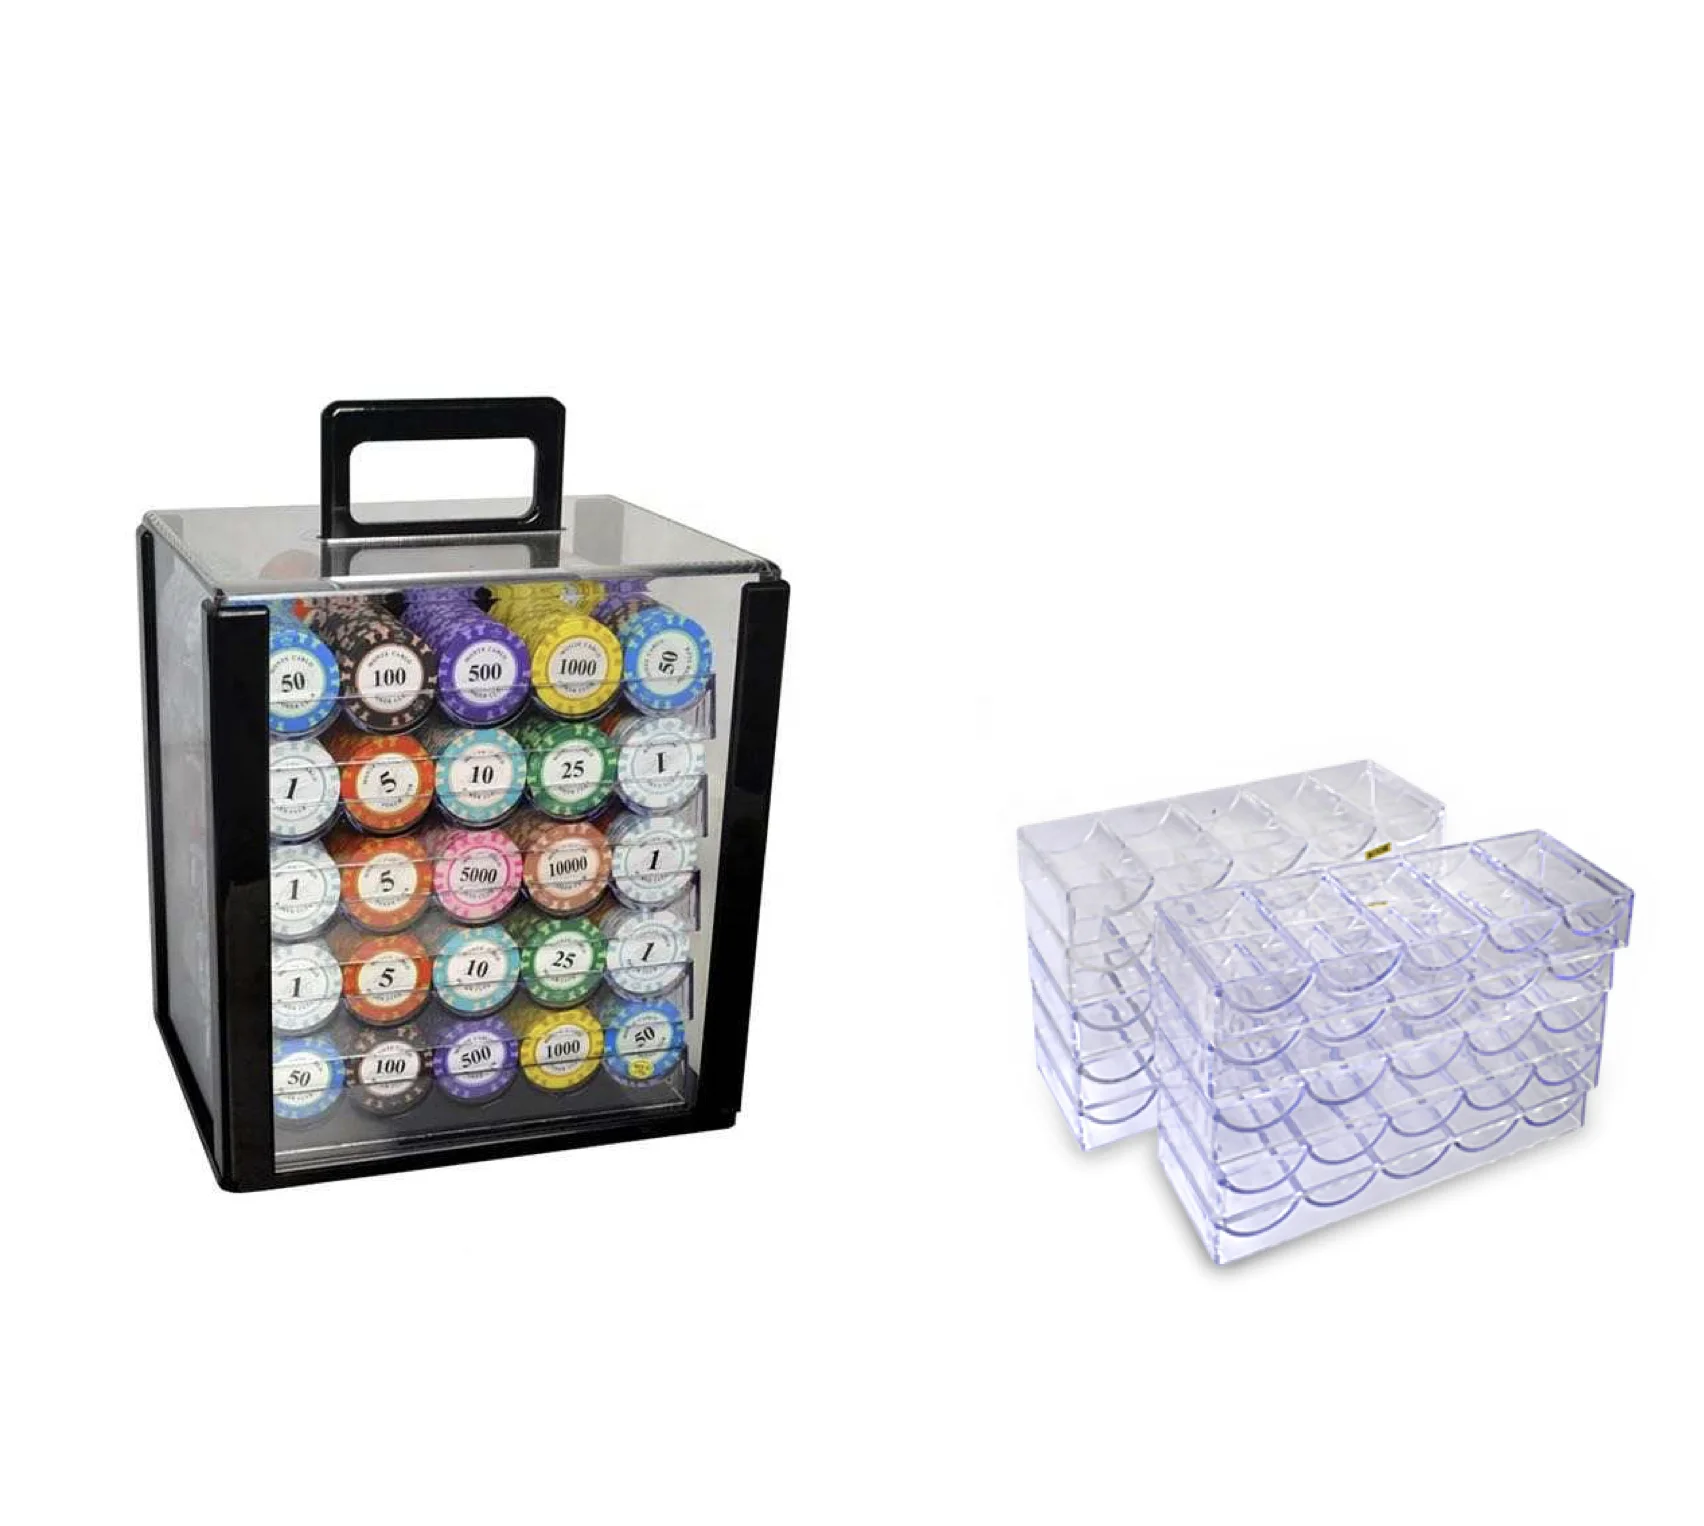 Winxtan factory with chip trays inside 600 poker chips case aluminum acrylic poker chip case